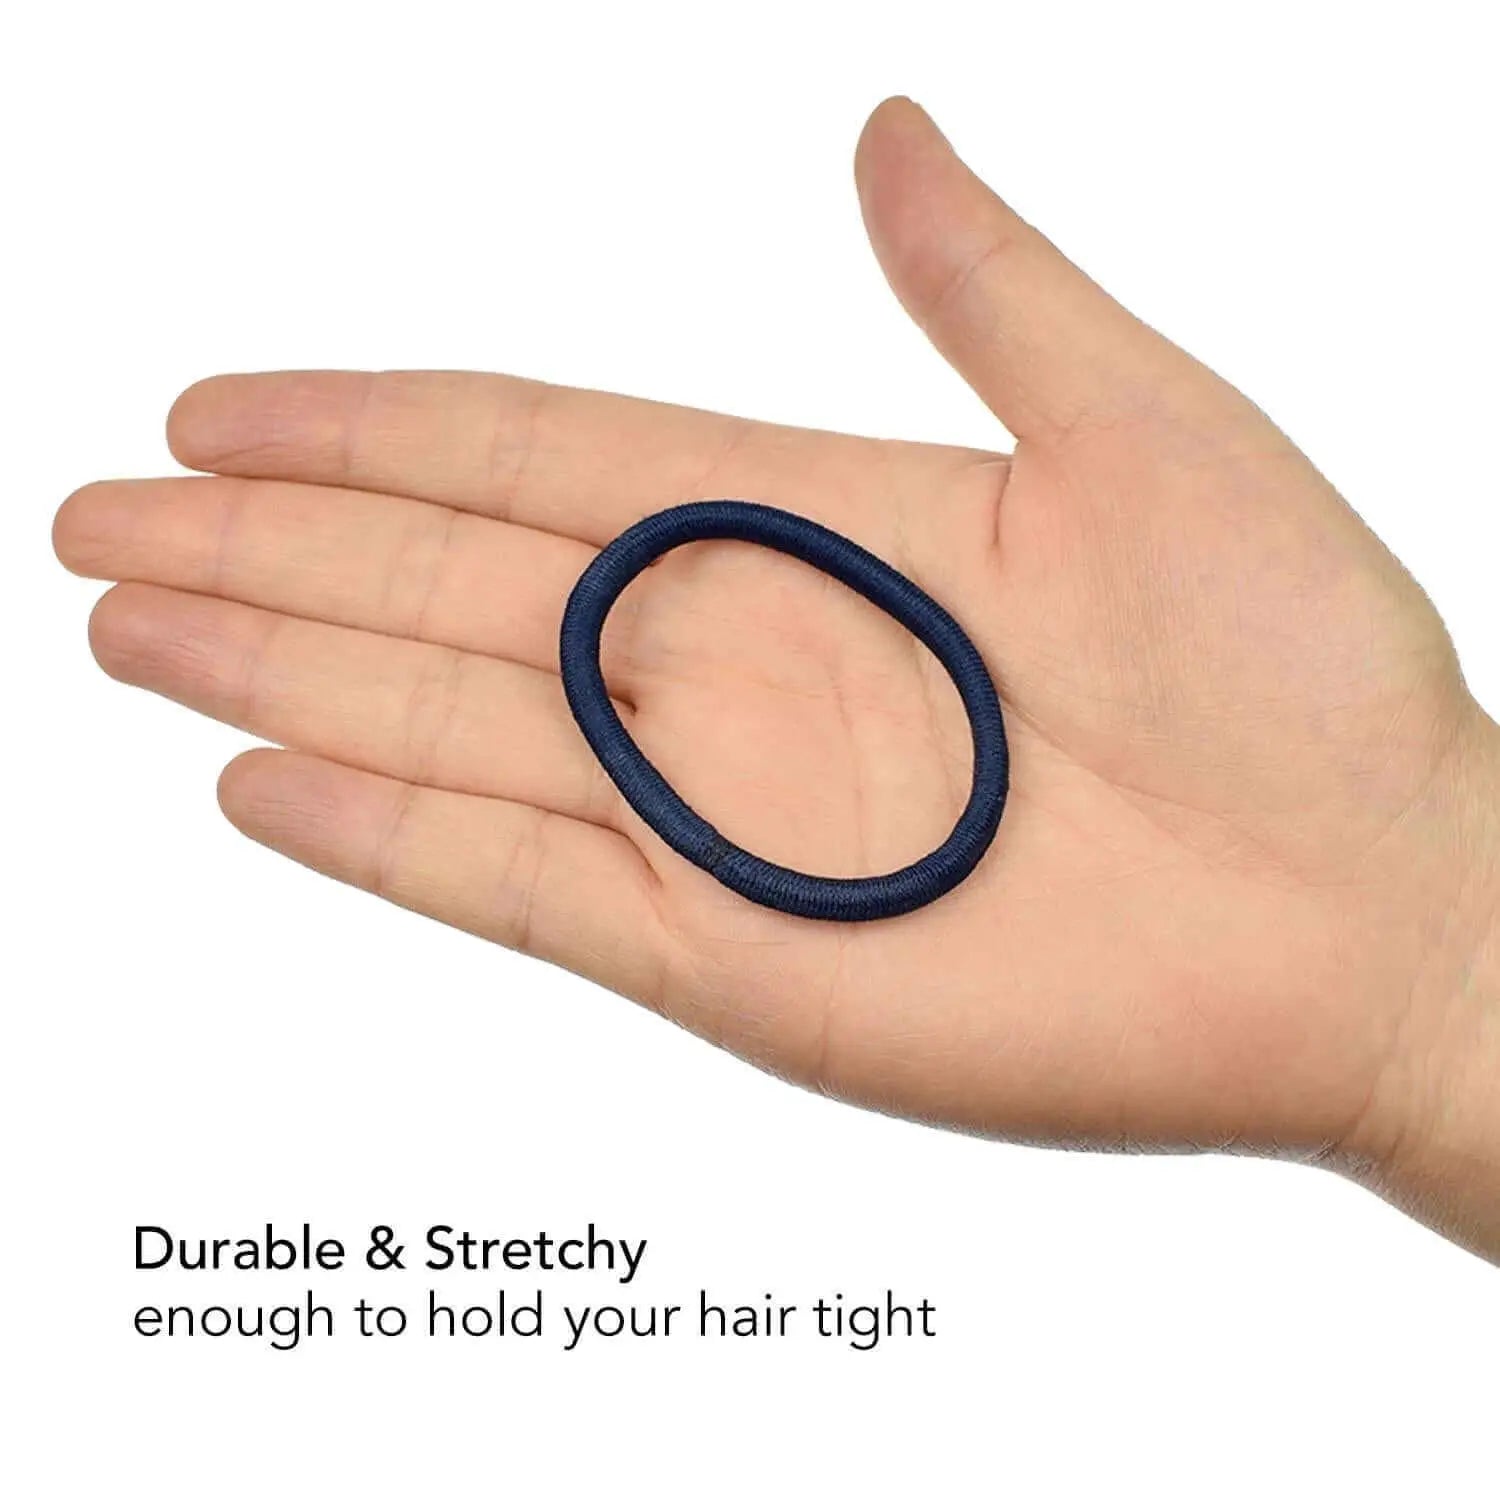 Hand holding blue ring from 3mm soft elastic hair ties product on white background